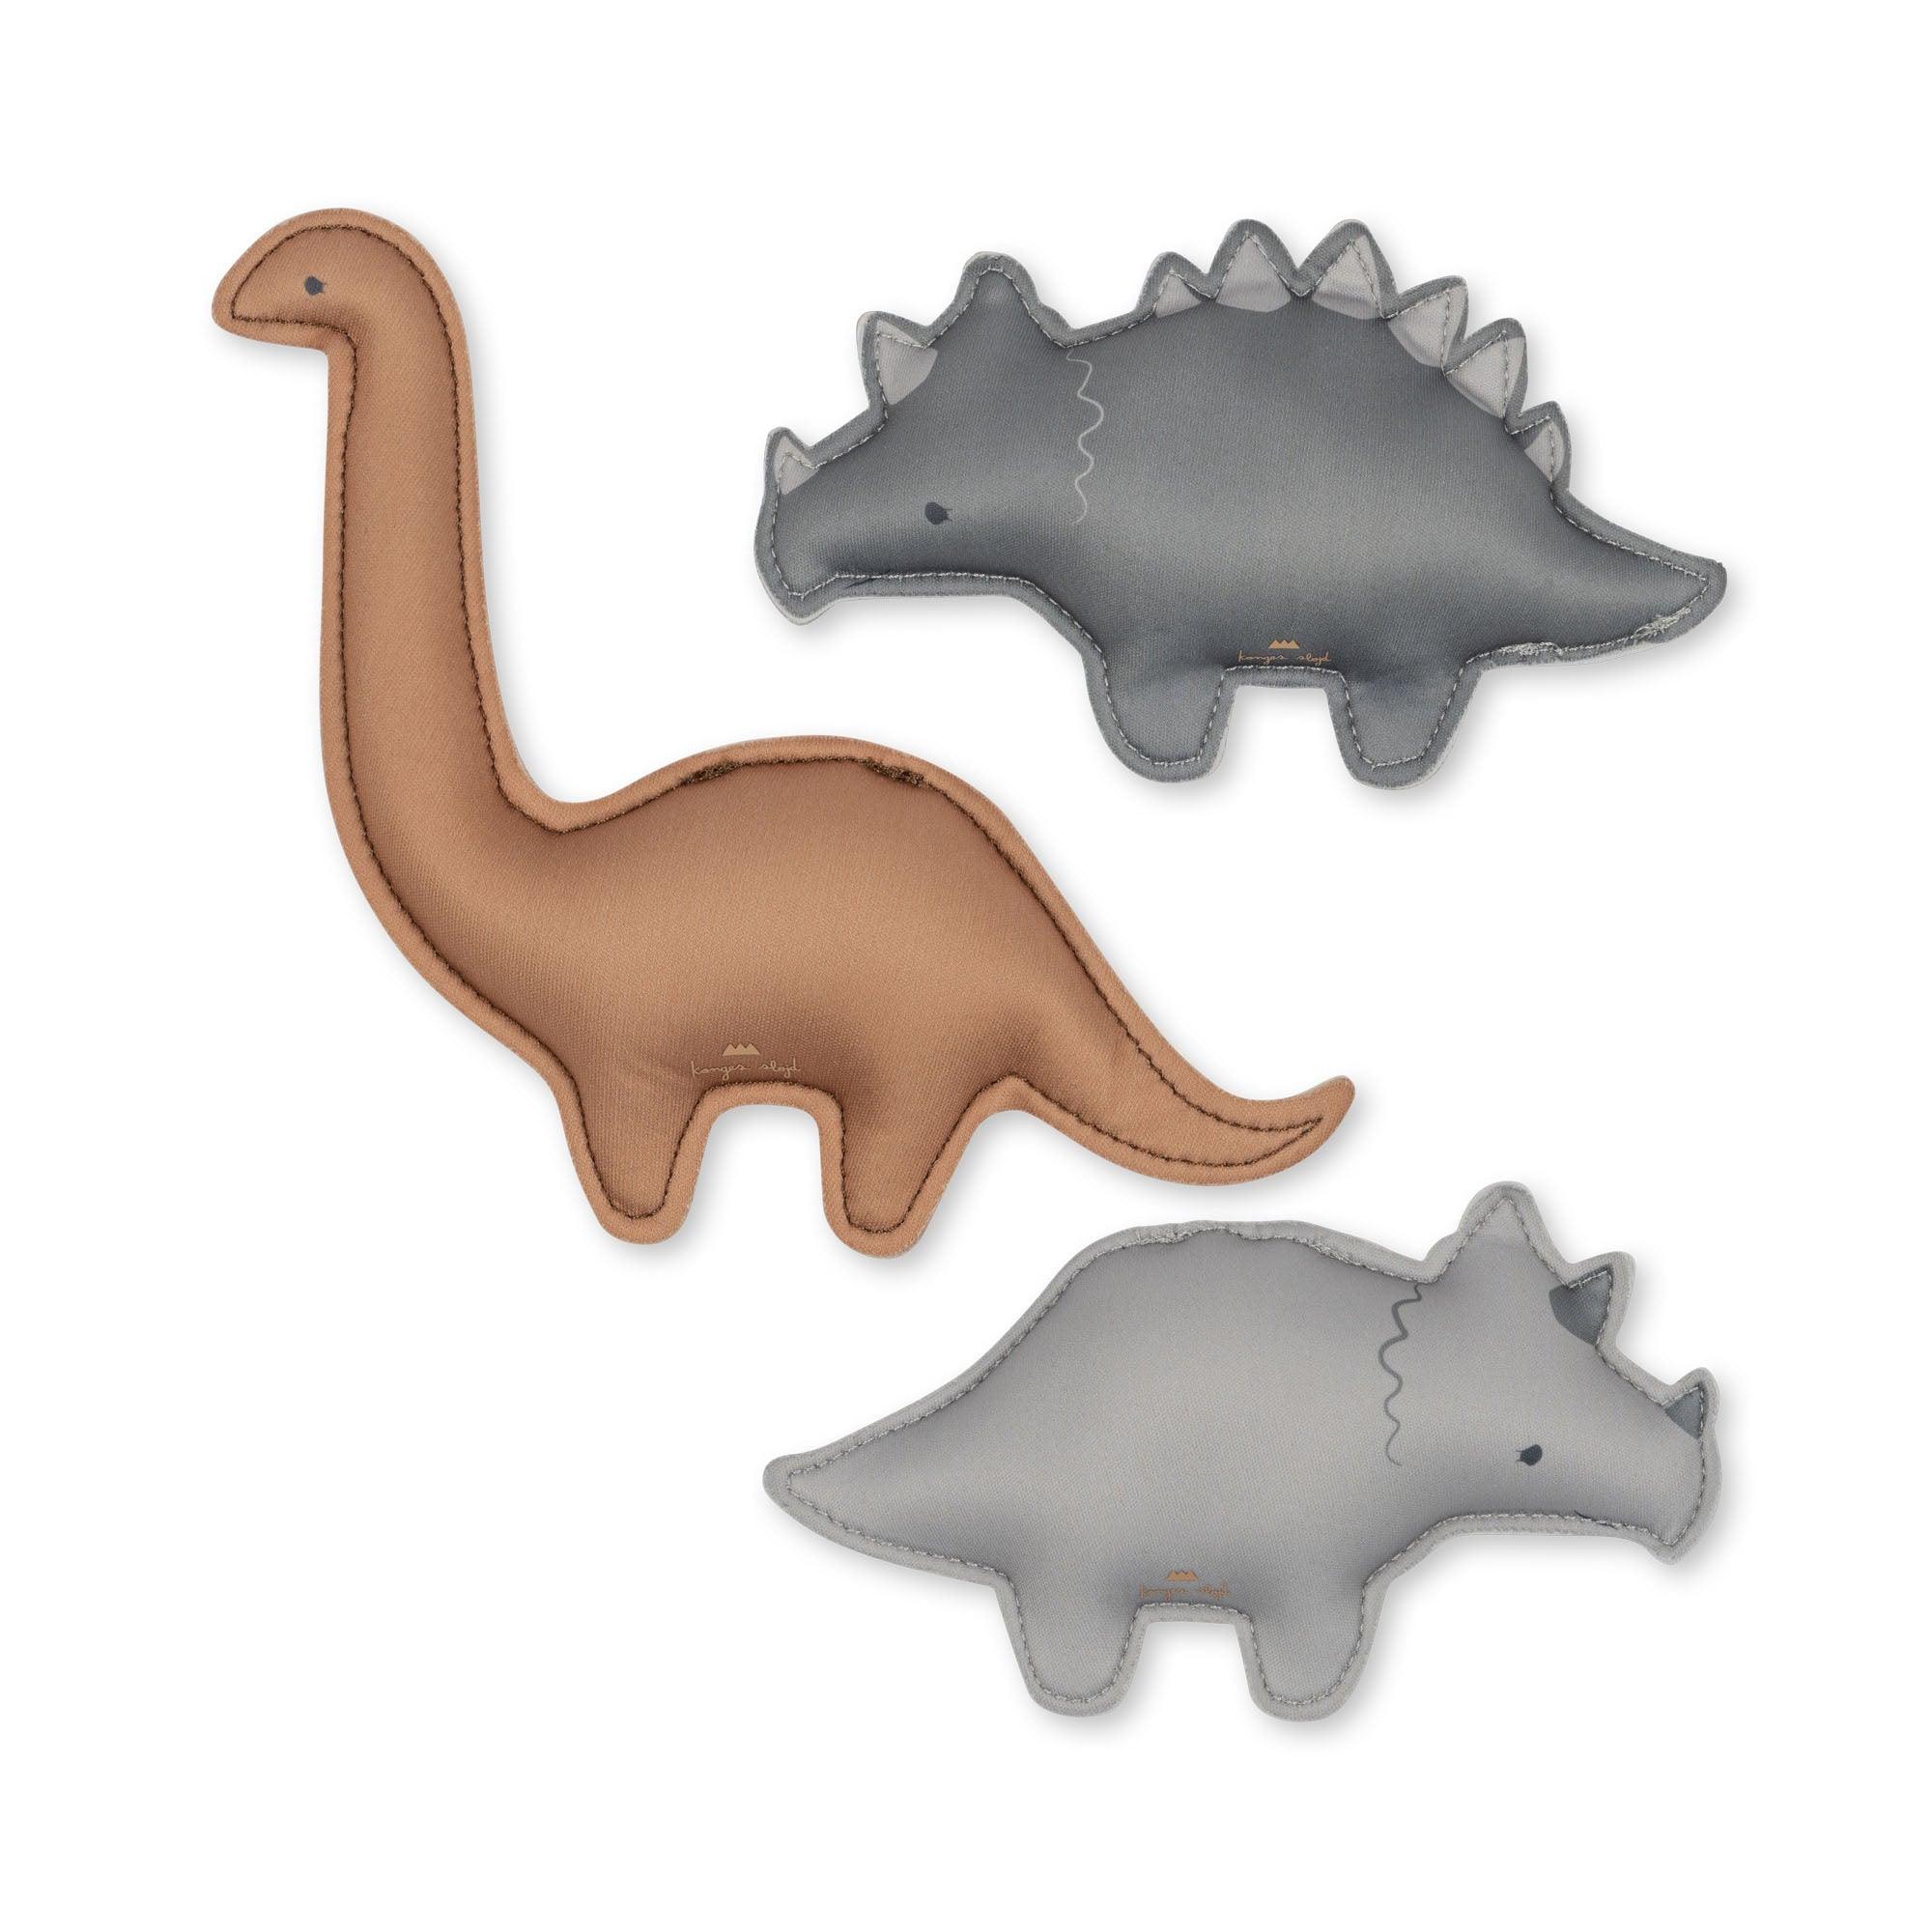 3 PACK DIVING FRIENDS - DINO - Why and Whale